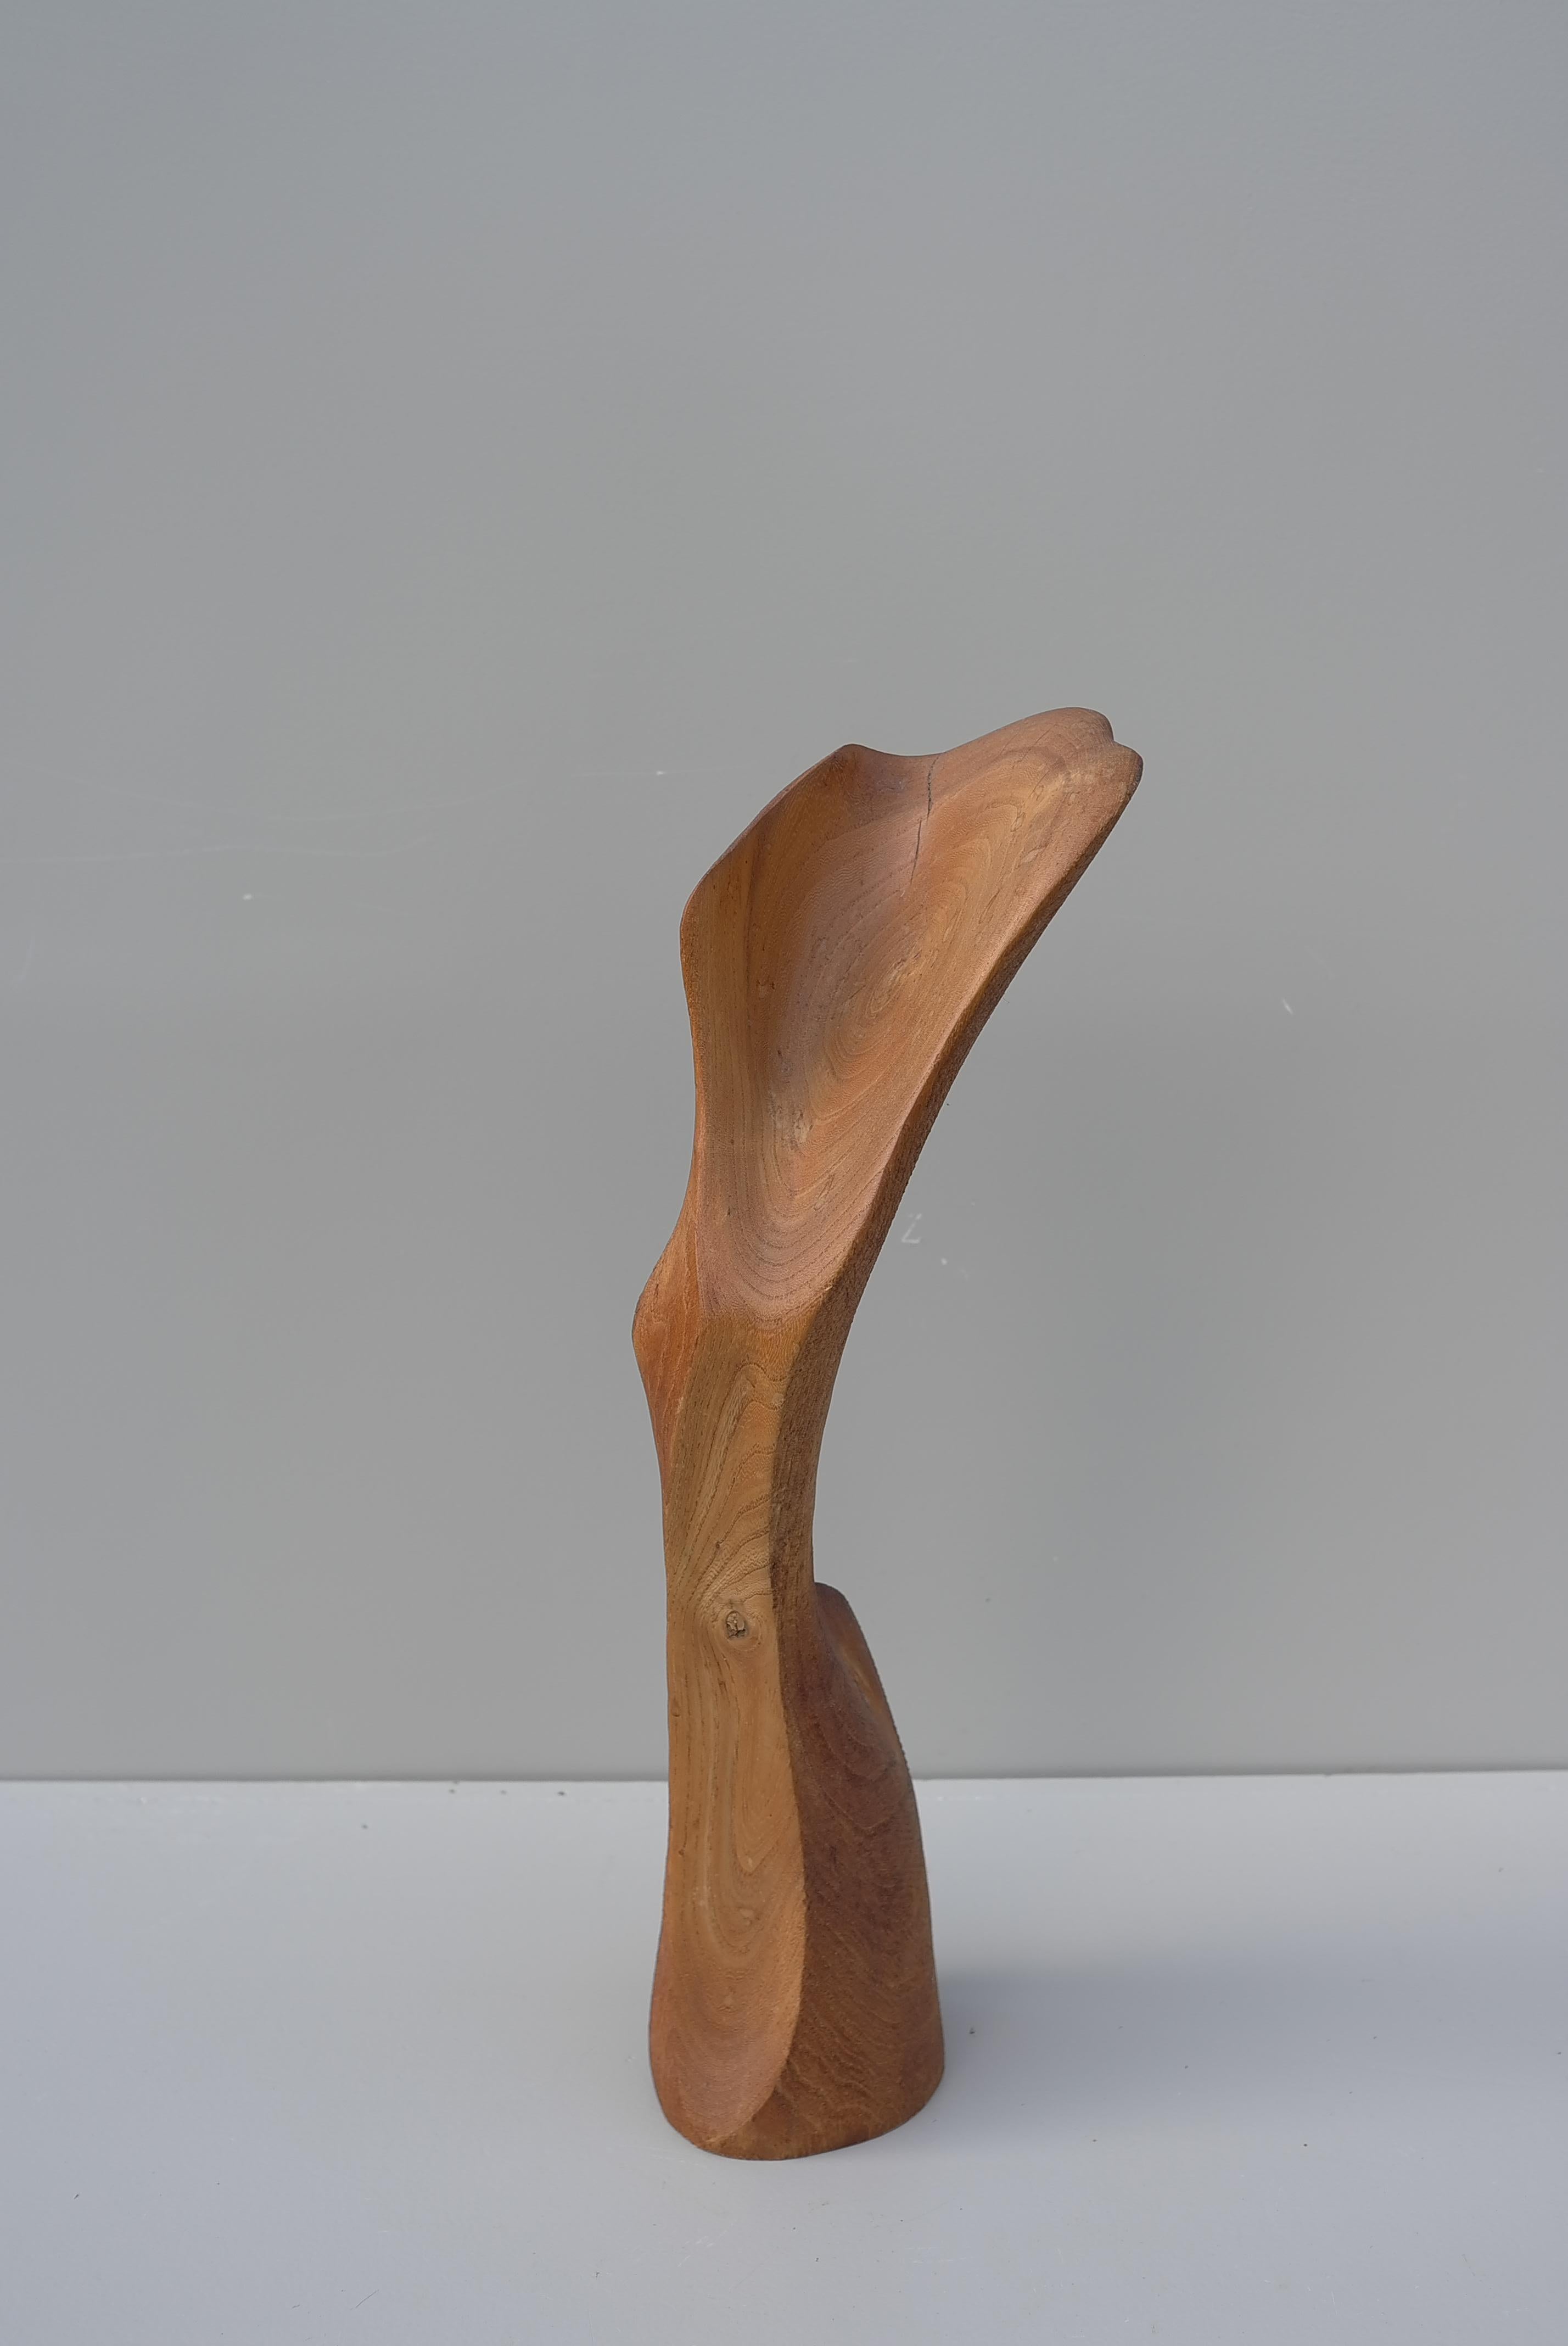  Abstract Mid-Century Modern Organic Wooden Sculpture, 1960's For Sale 4